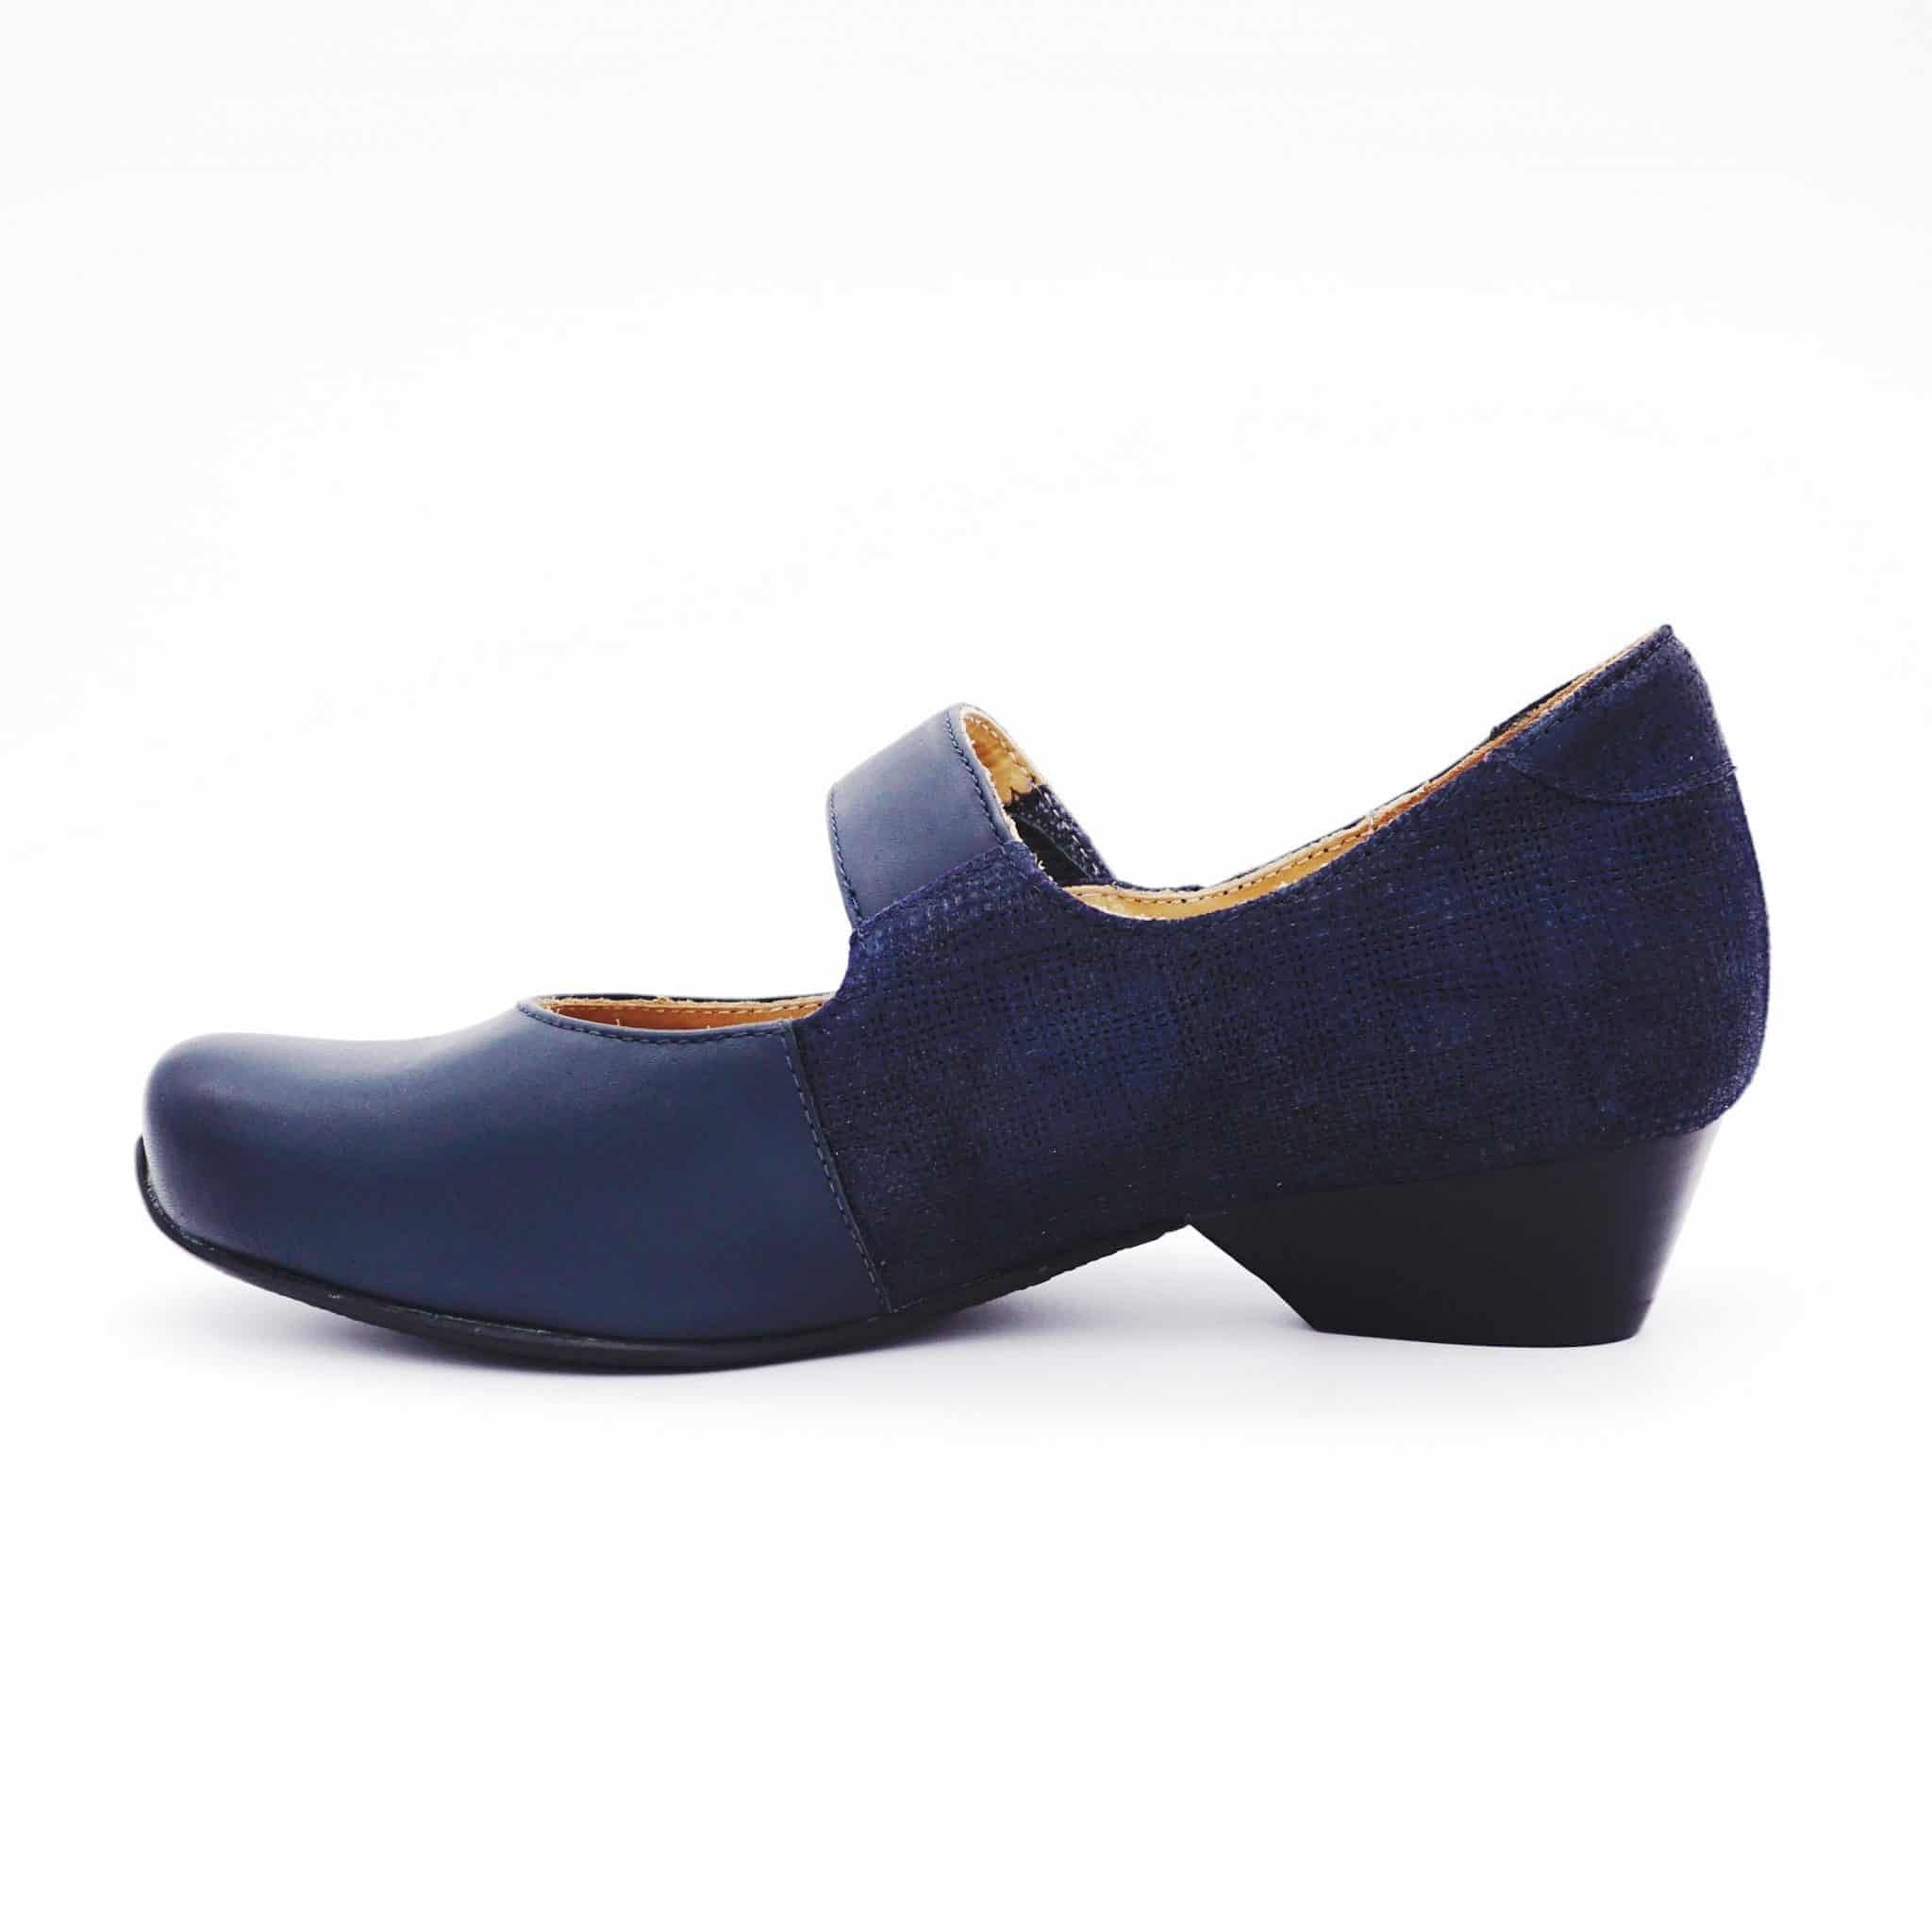 Footkaki | Wide Fitting Cassidy Pumps by ZIERA Comfort Shoes